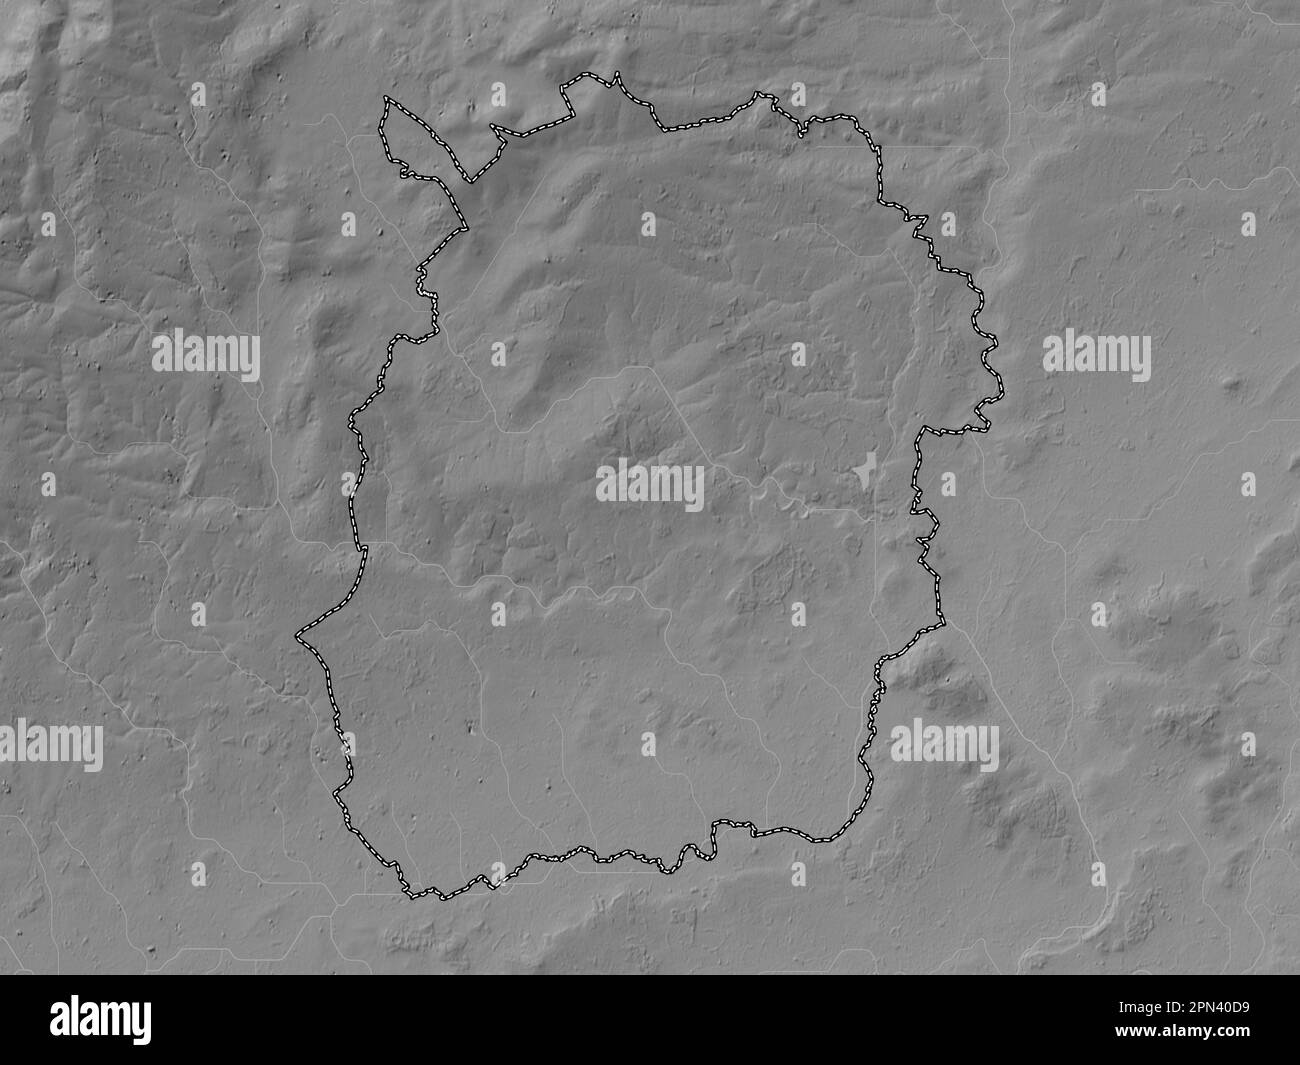 West Oxfordshire, non metropolitan district of England - Great Britain. Grayscale elevation map with lakes and rivers Stock Photo